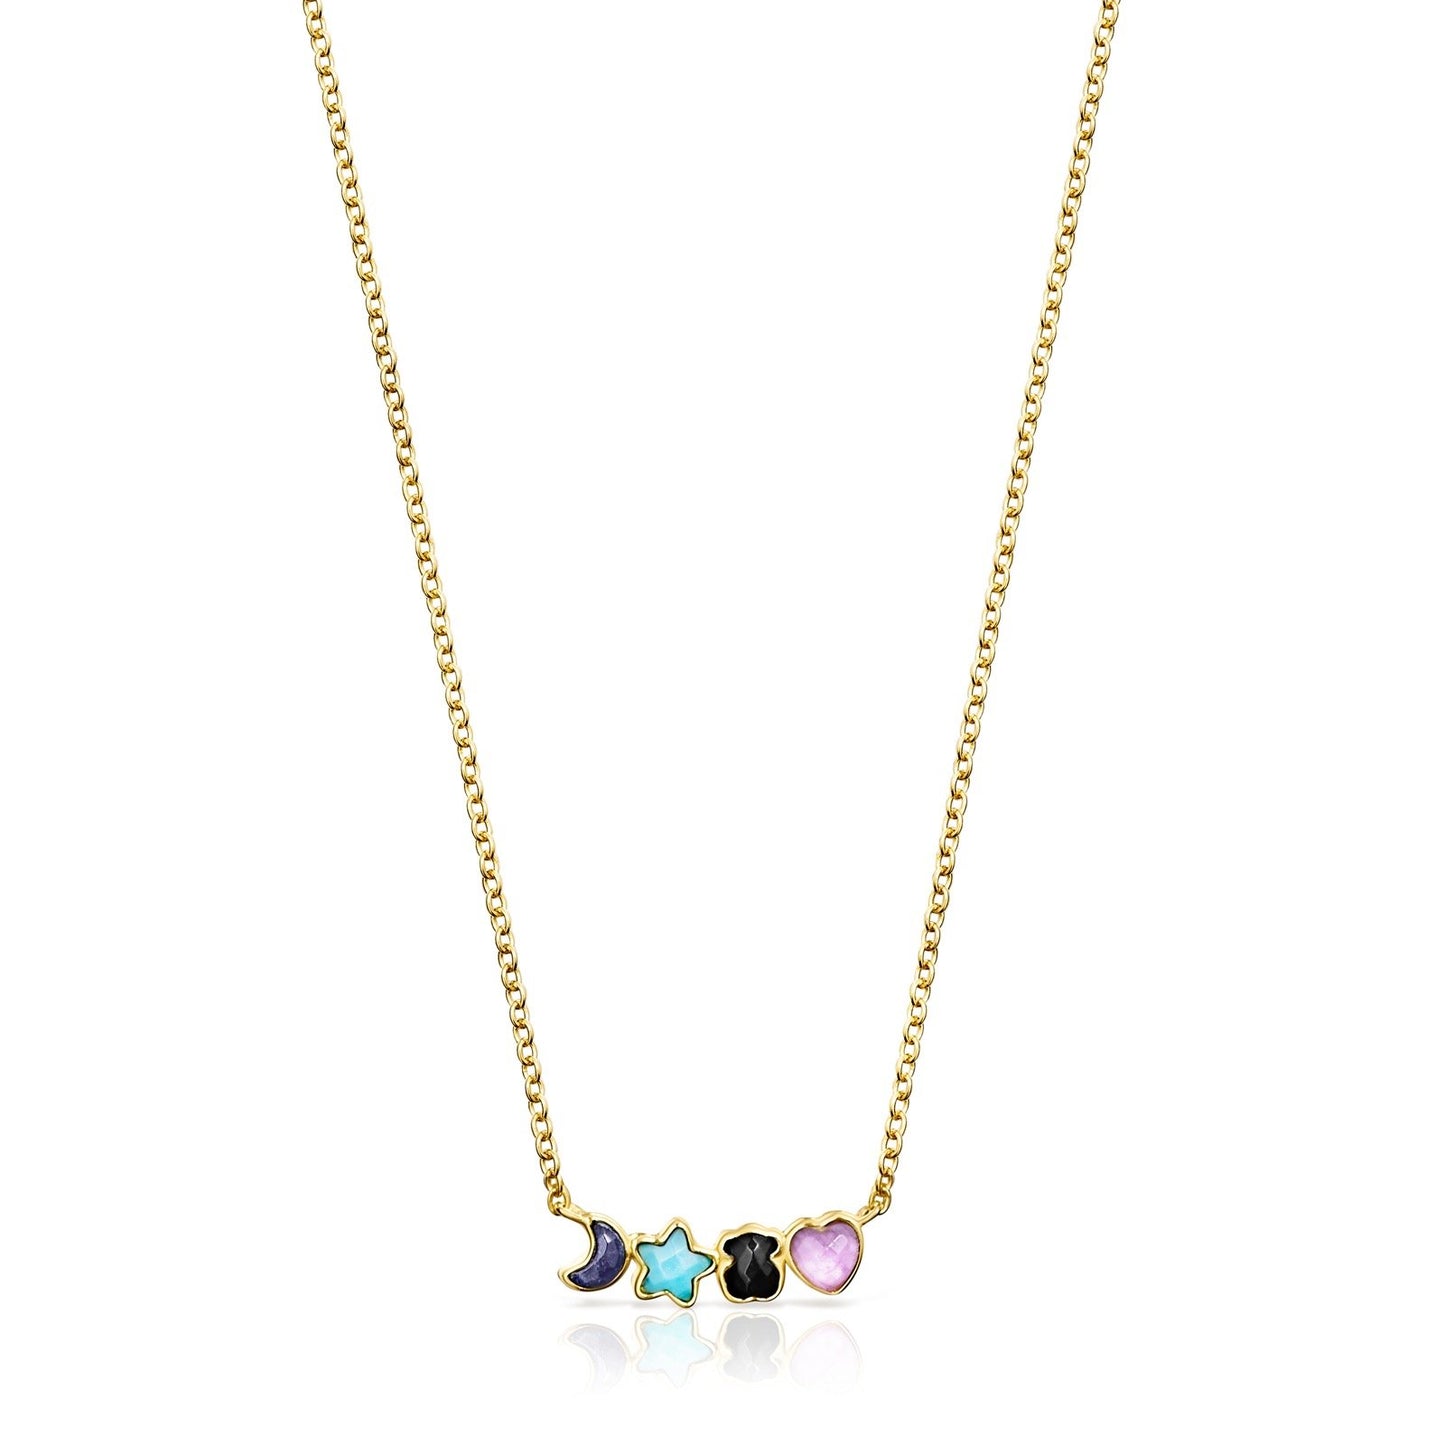 Tous Glory Necklace in Gold Vermeil with Gemstones 918592510